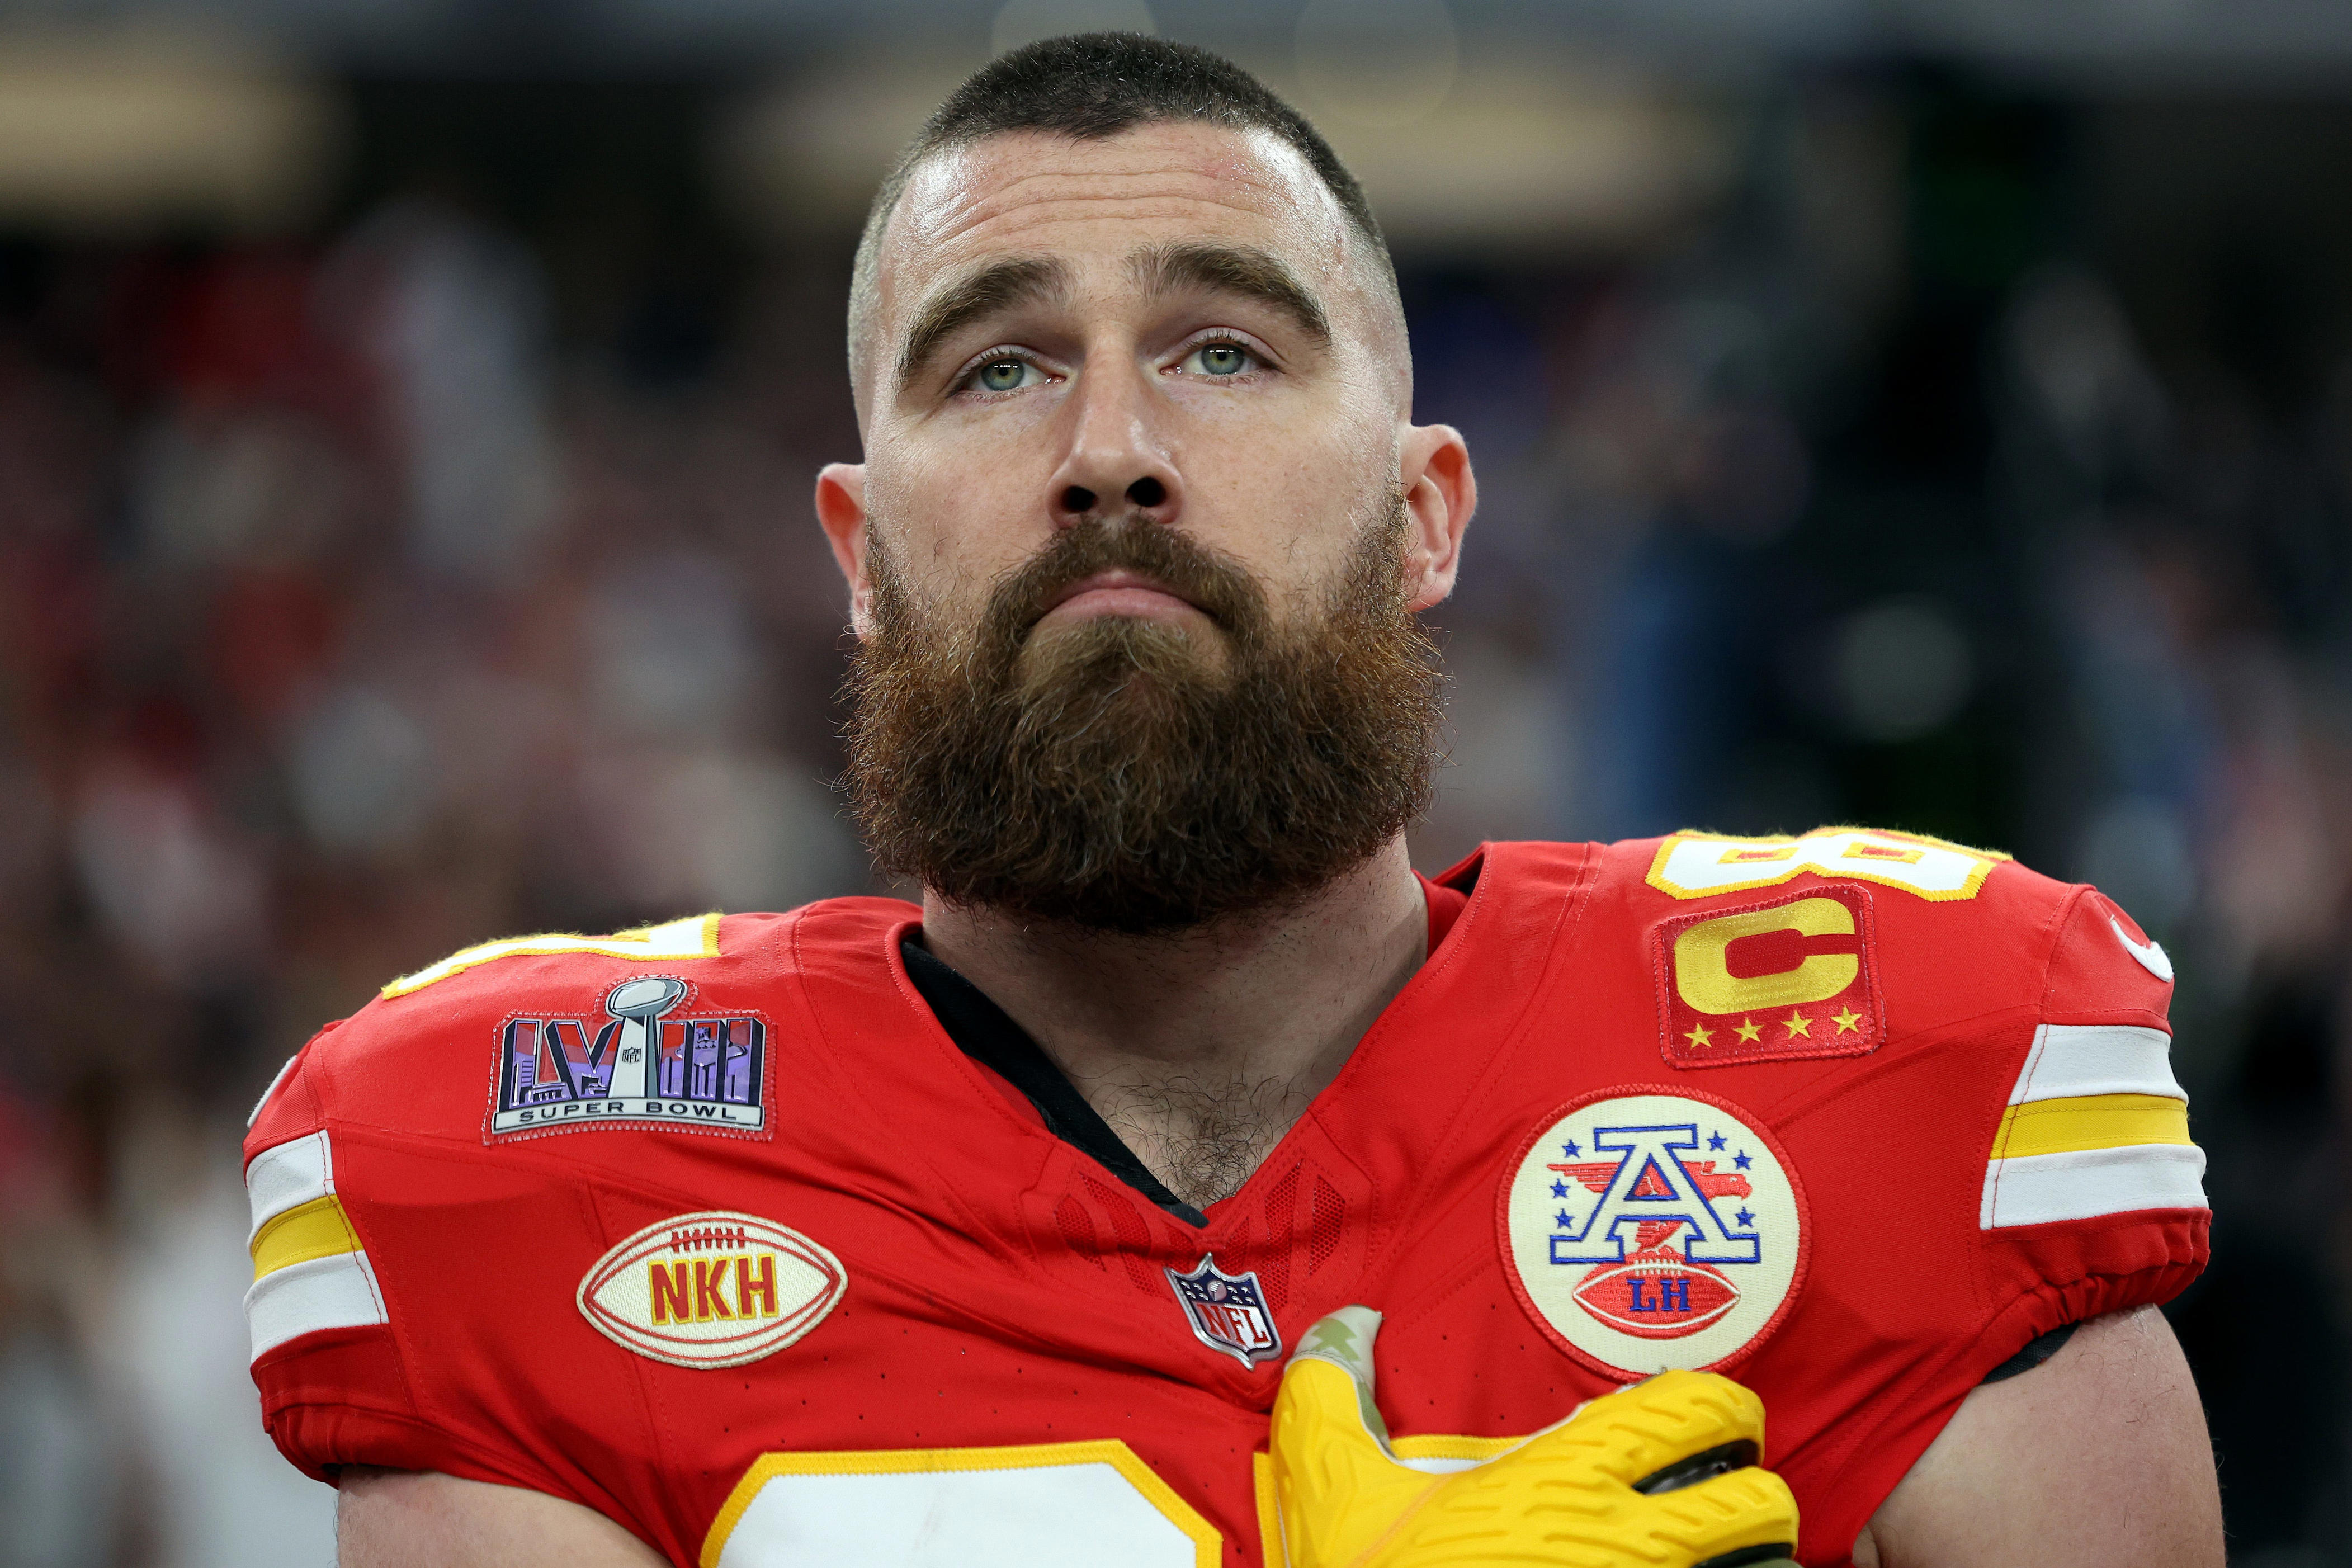 amazon, travis kelce to host celebrity spinoff of 'are you smarter than a 5th grader?'